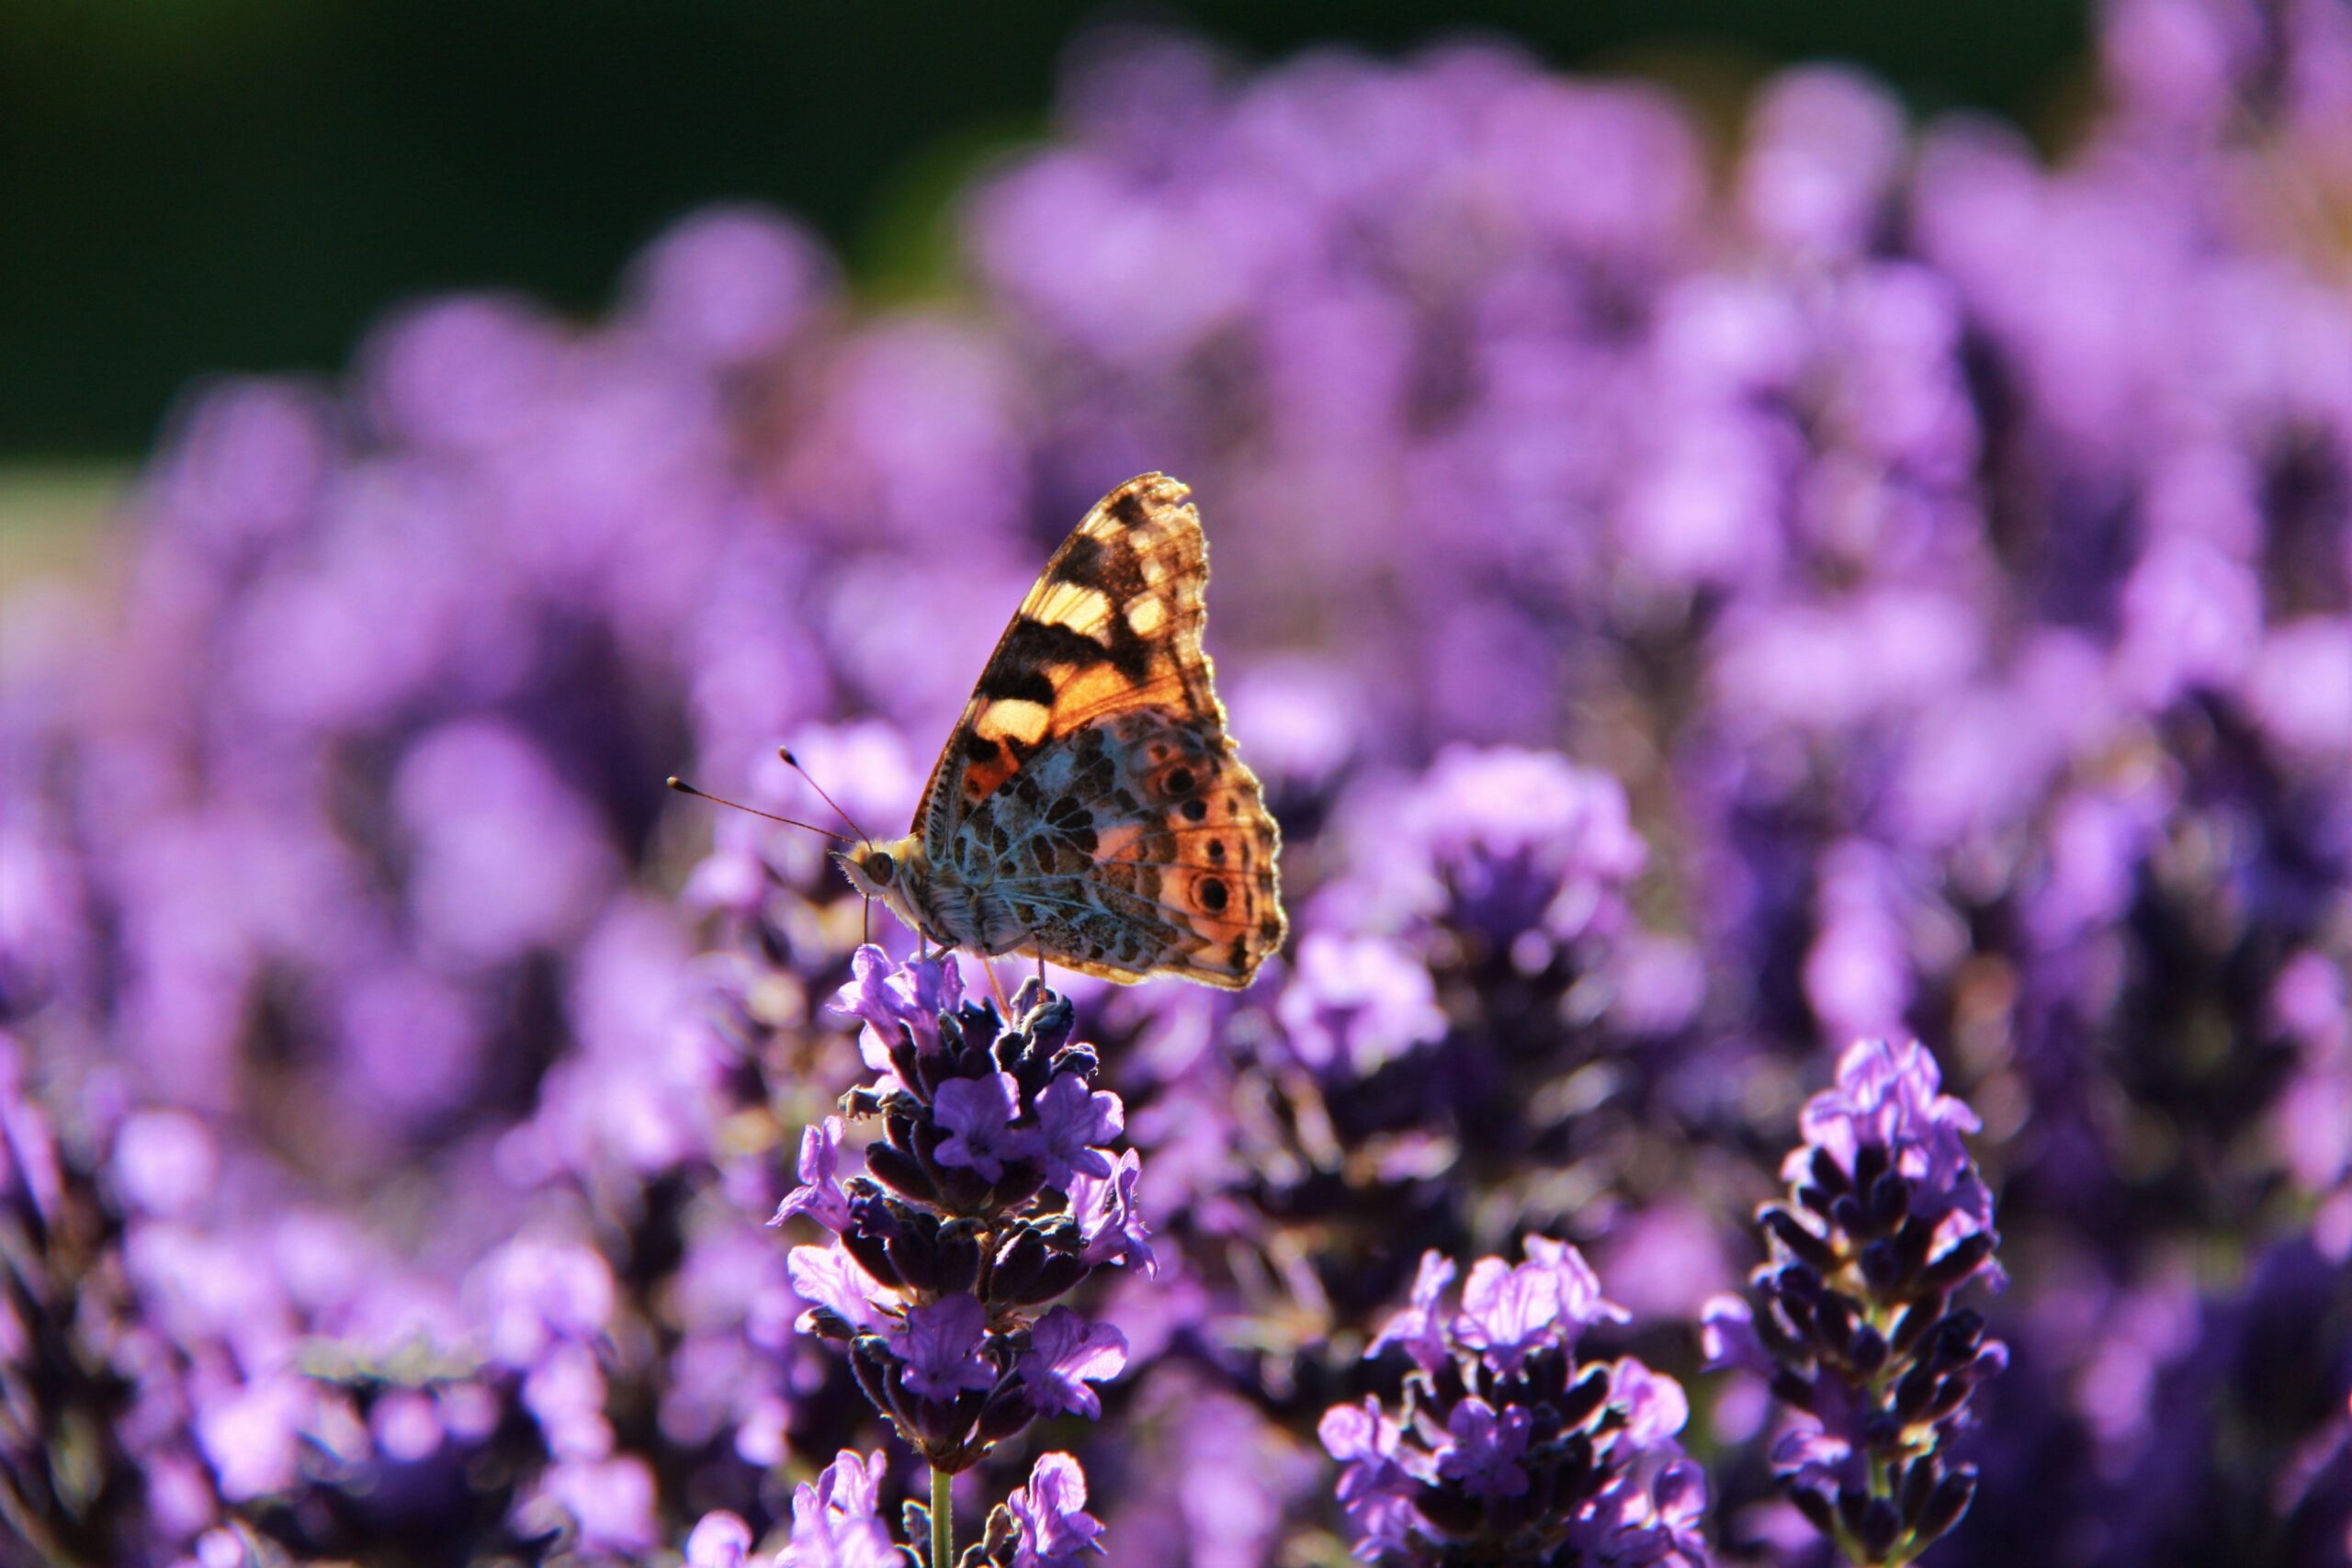 A small butterfly gathers pollen in a field of lavender